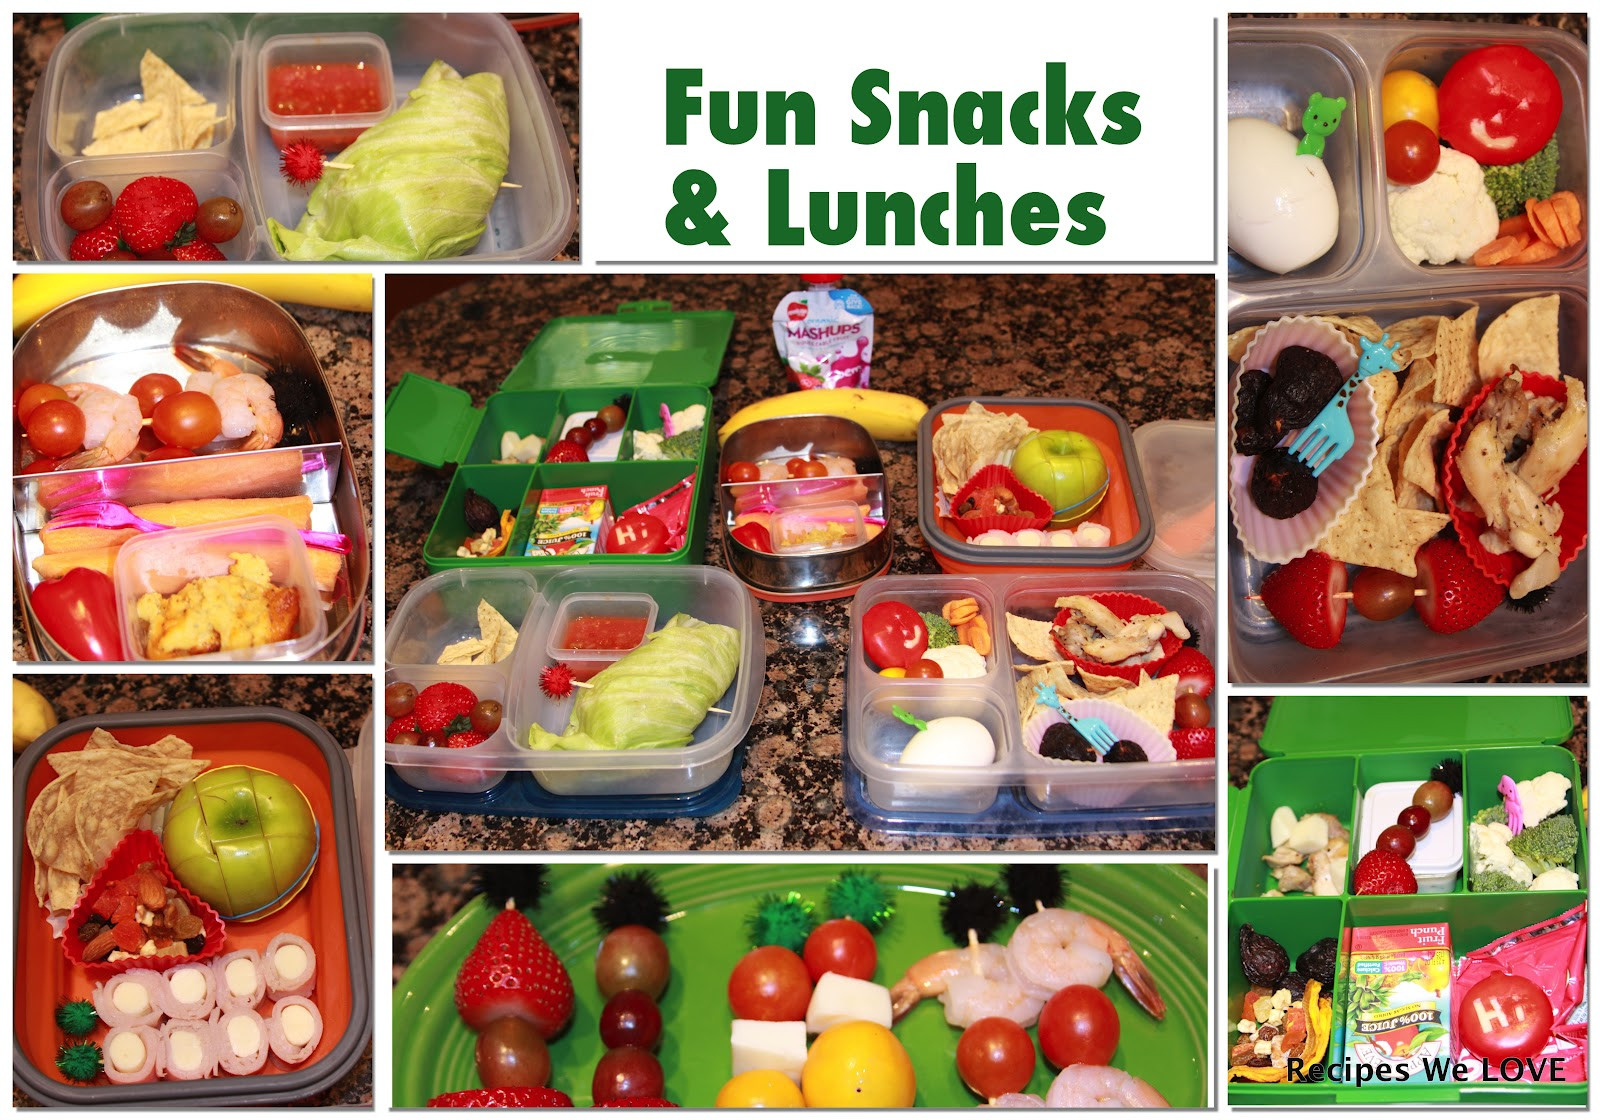 Healthy Snacks For Kids Lunch Boxes
 Parkhurst Family Packing Healthy School Lunches